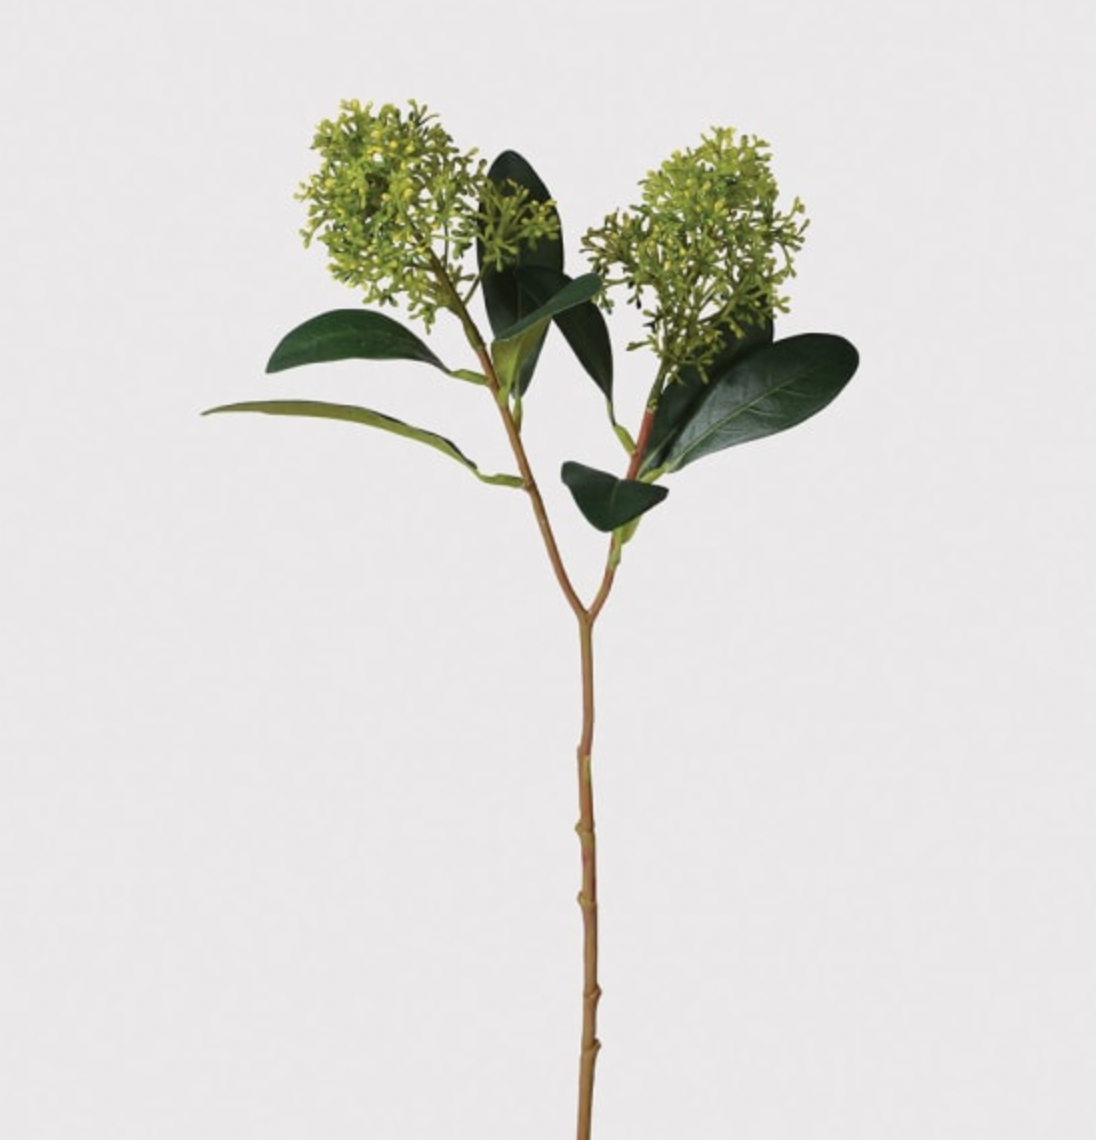 Green Skimmia Spray with Leaves